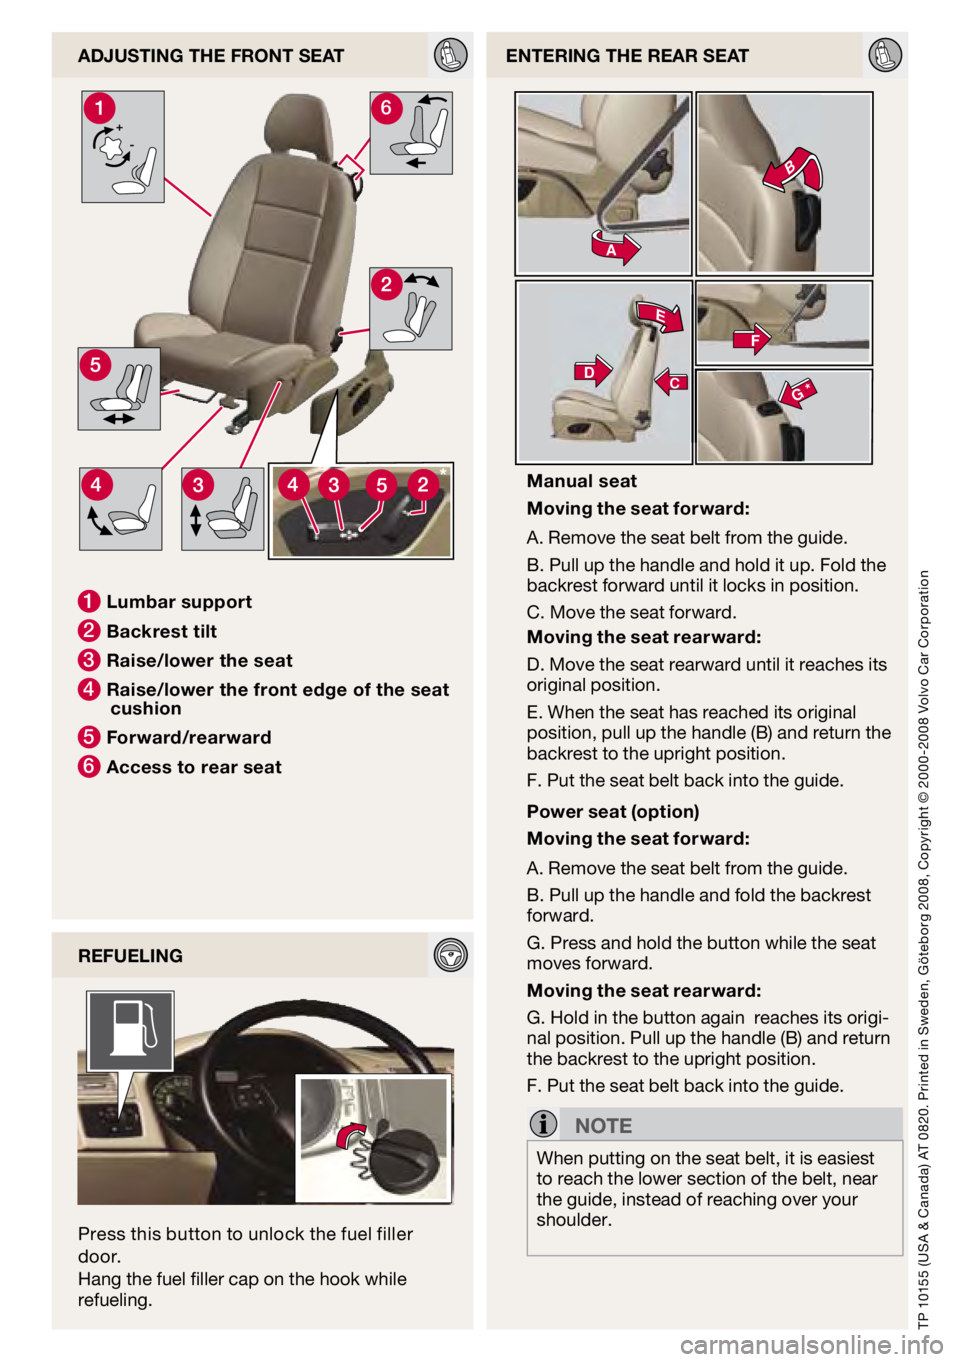 VOLVO C30 2009  Quick Guide +-6
A
E
B
F
G *CD
AdjUSTIng The FROnT SeAT
1  l umbar support
2 b ackrest tilt
3 Raise/lower the seat
4 Raise/lower the front edge of the seat 
cushion
5 Forward/rearward
6 Access to rear seat
TP 1015